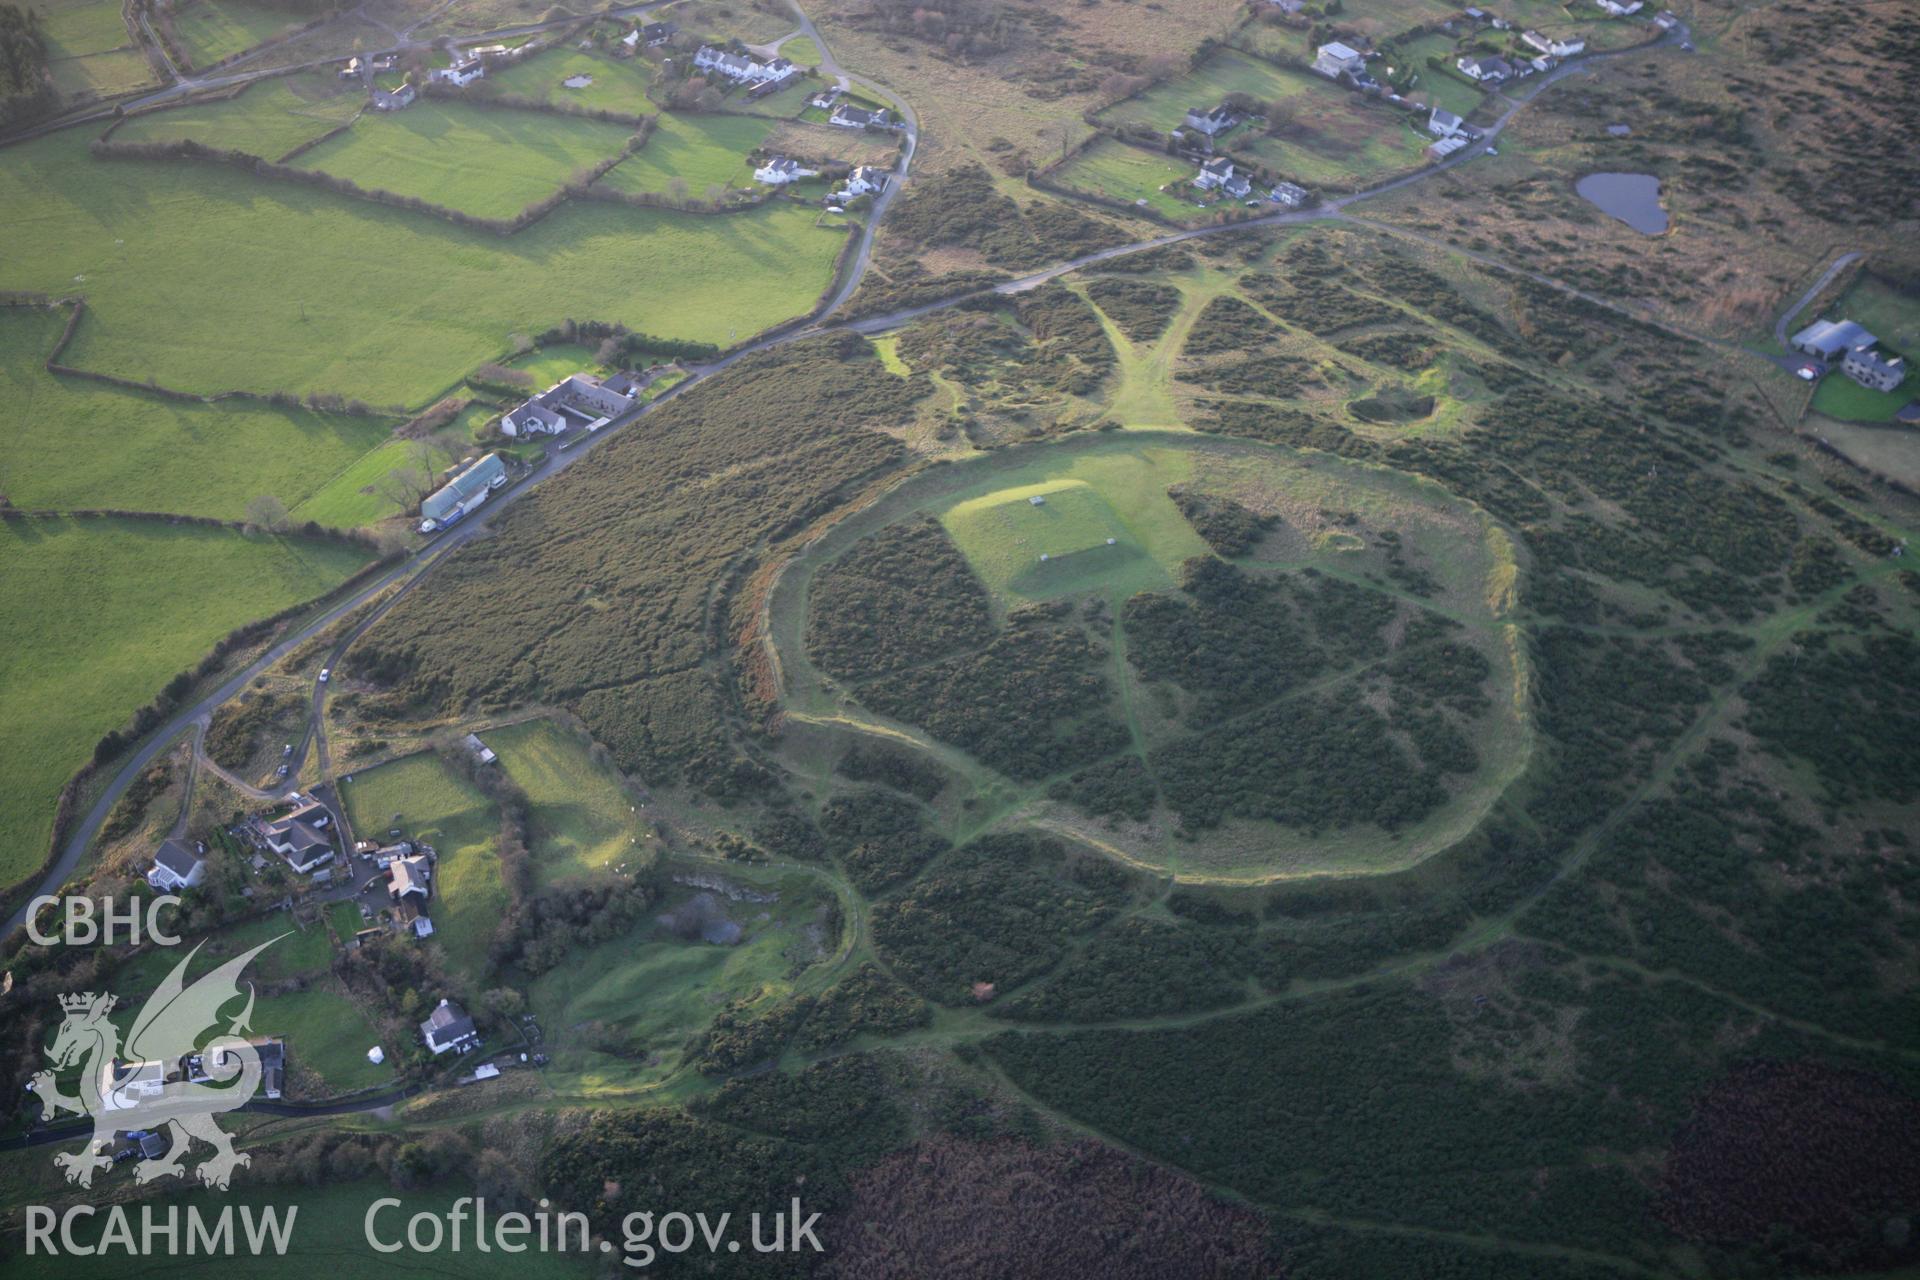 RCAHMW colour oblique aerial photograph of Moel-y-Gaer Camp and hillfort. Taken on 10 December 2009 by Toby Driver